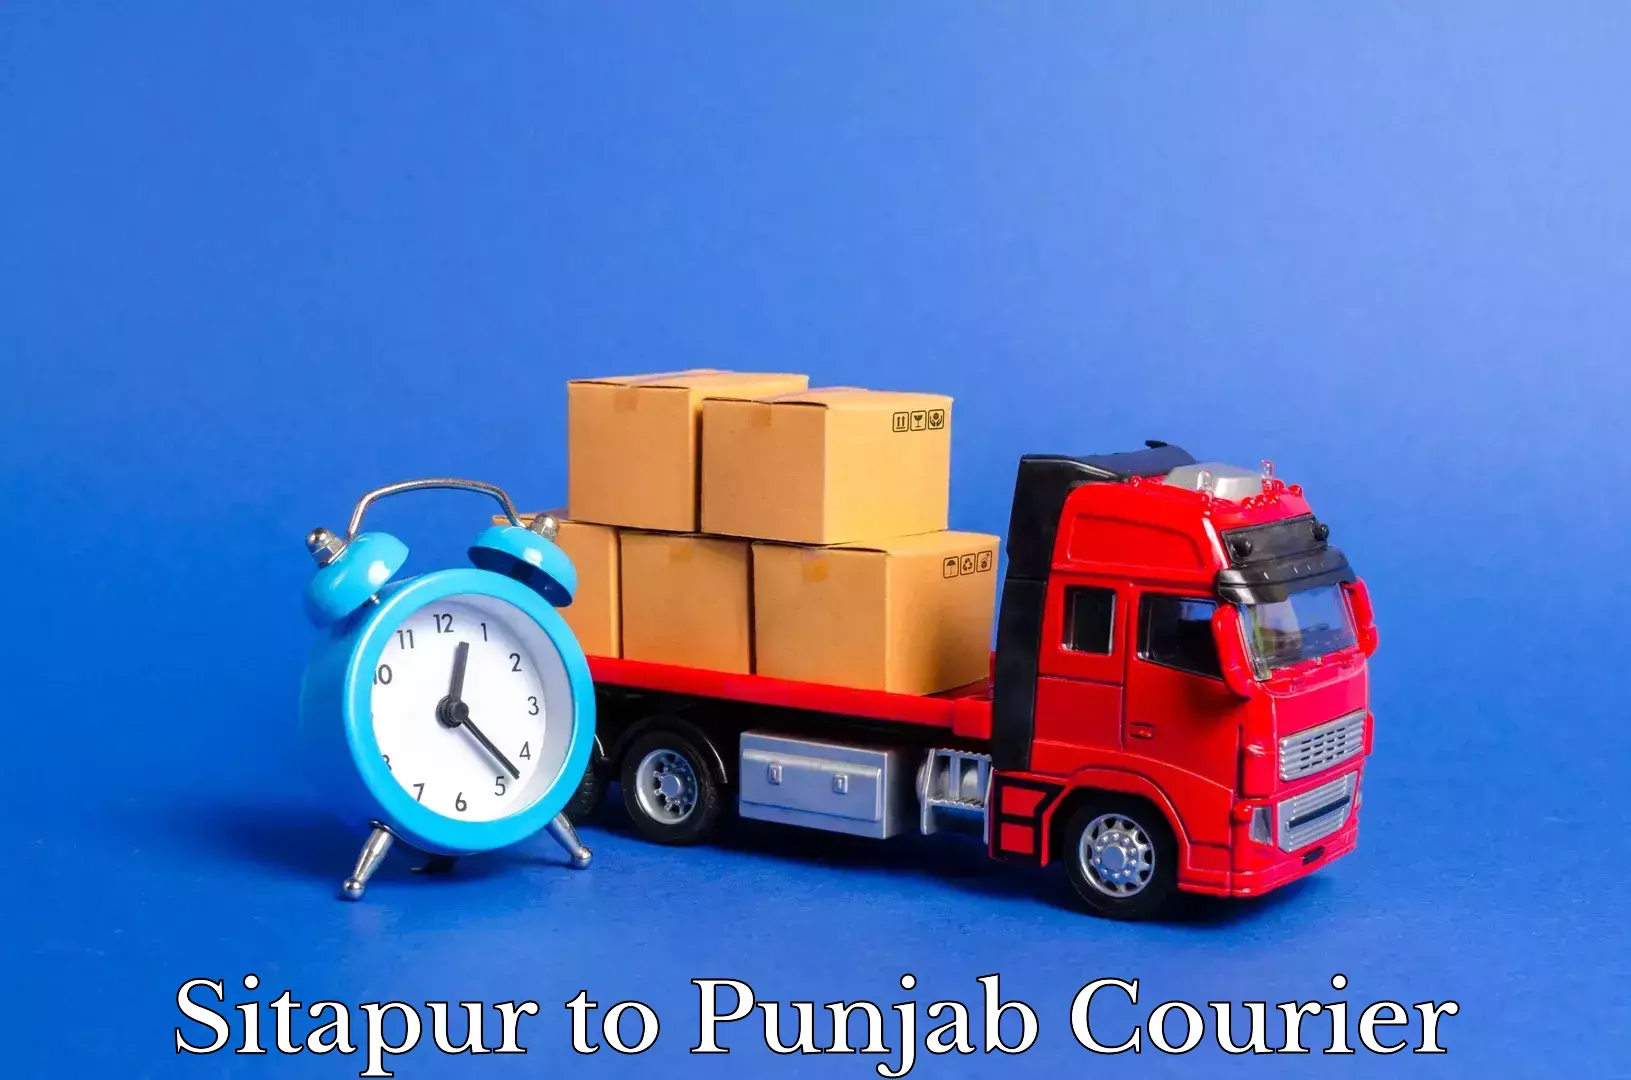 Quality moving company Sitapur to Amritsar